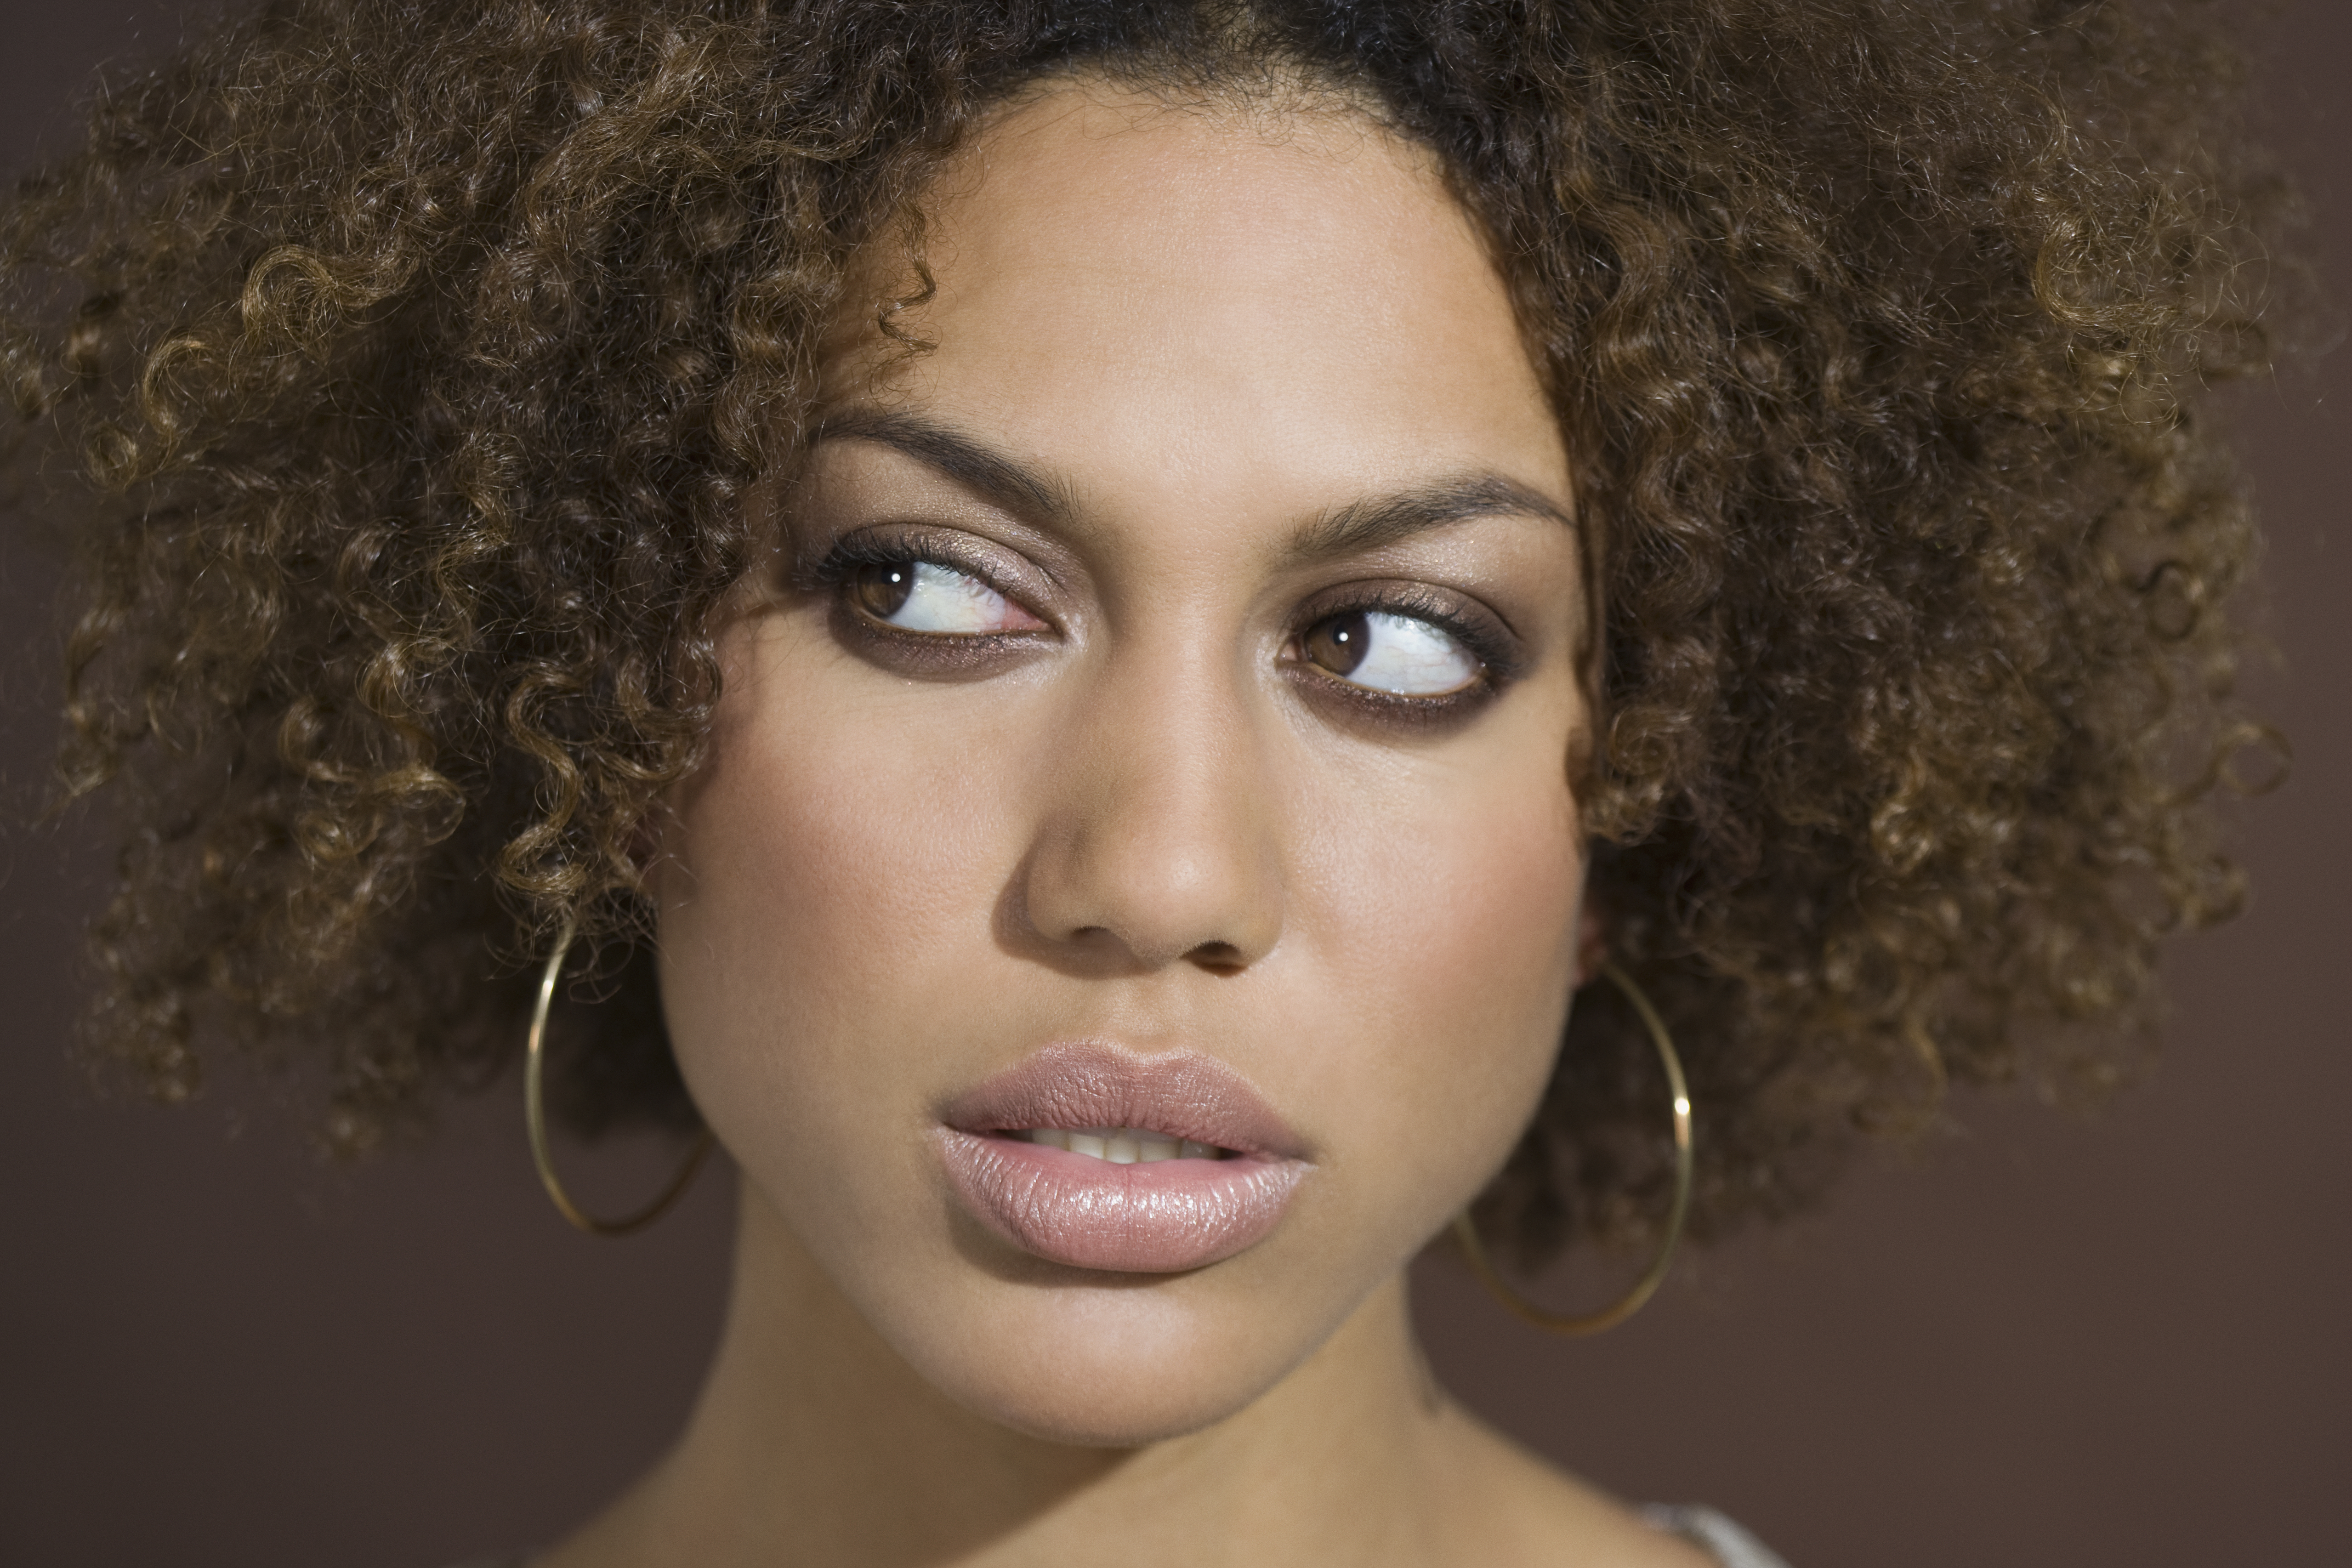 Mixed Race woman looking sideways | Source: Getty Images